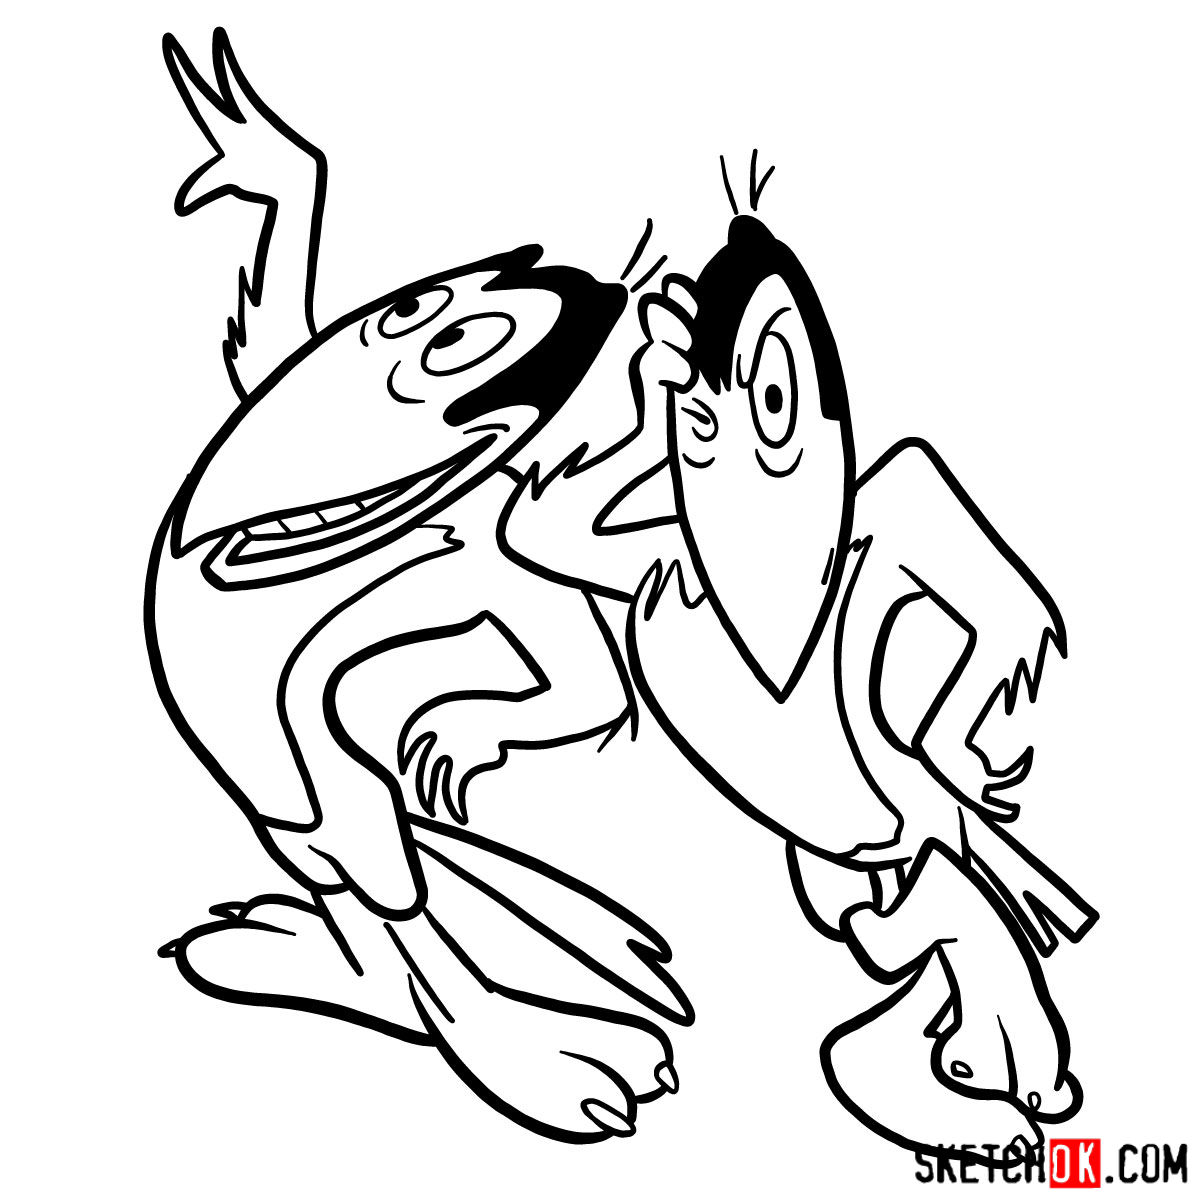 How to draw Heckle and Jeckle - step 18